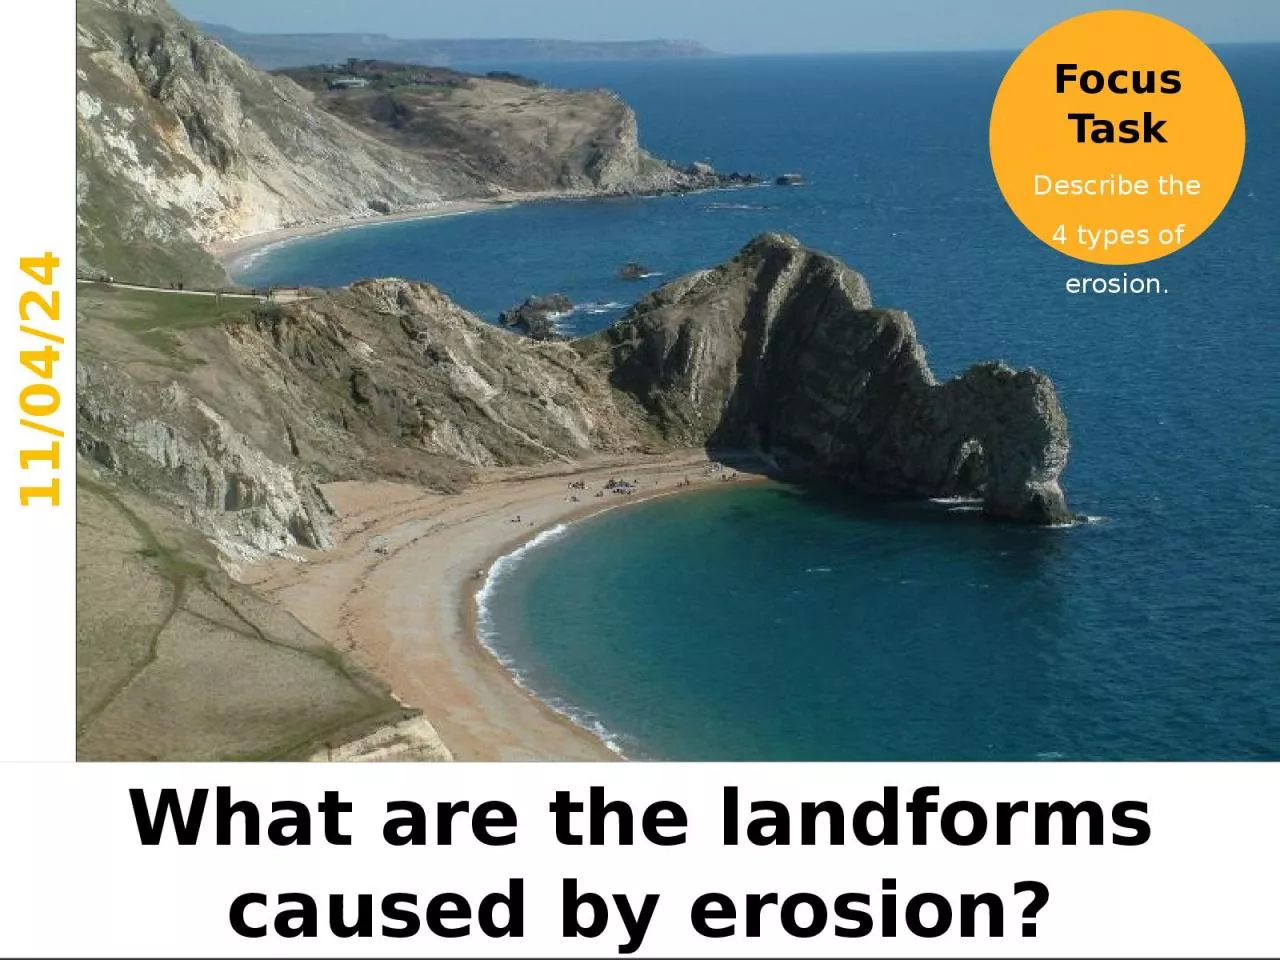 Focus Task Describe the 4 types of erosion.